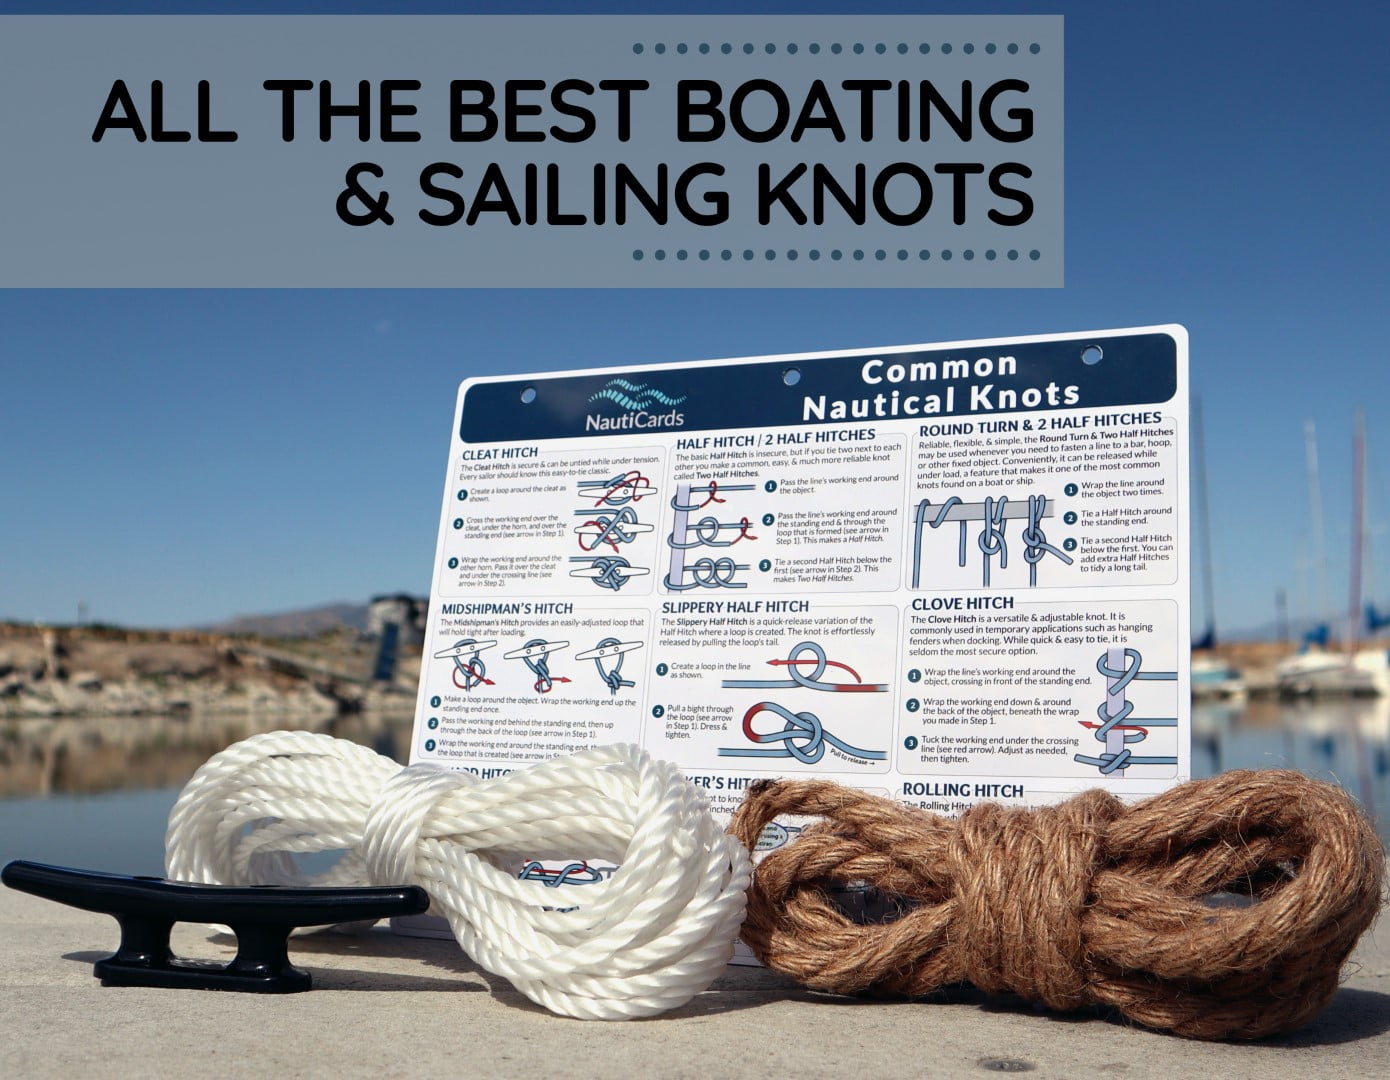 Deluxe Knot Tying Kit with Rope, Cord, Fishing Line, and 3 Knot Tying  Guides (Outdoors, Fishing, Boating) - Learn How to Tie 42 Knots